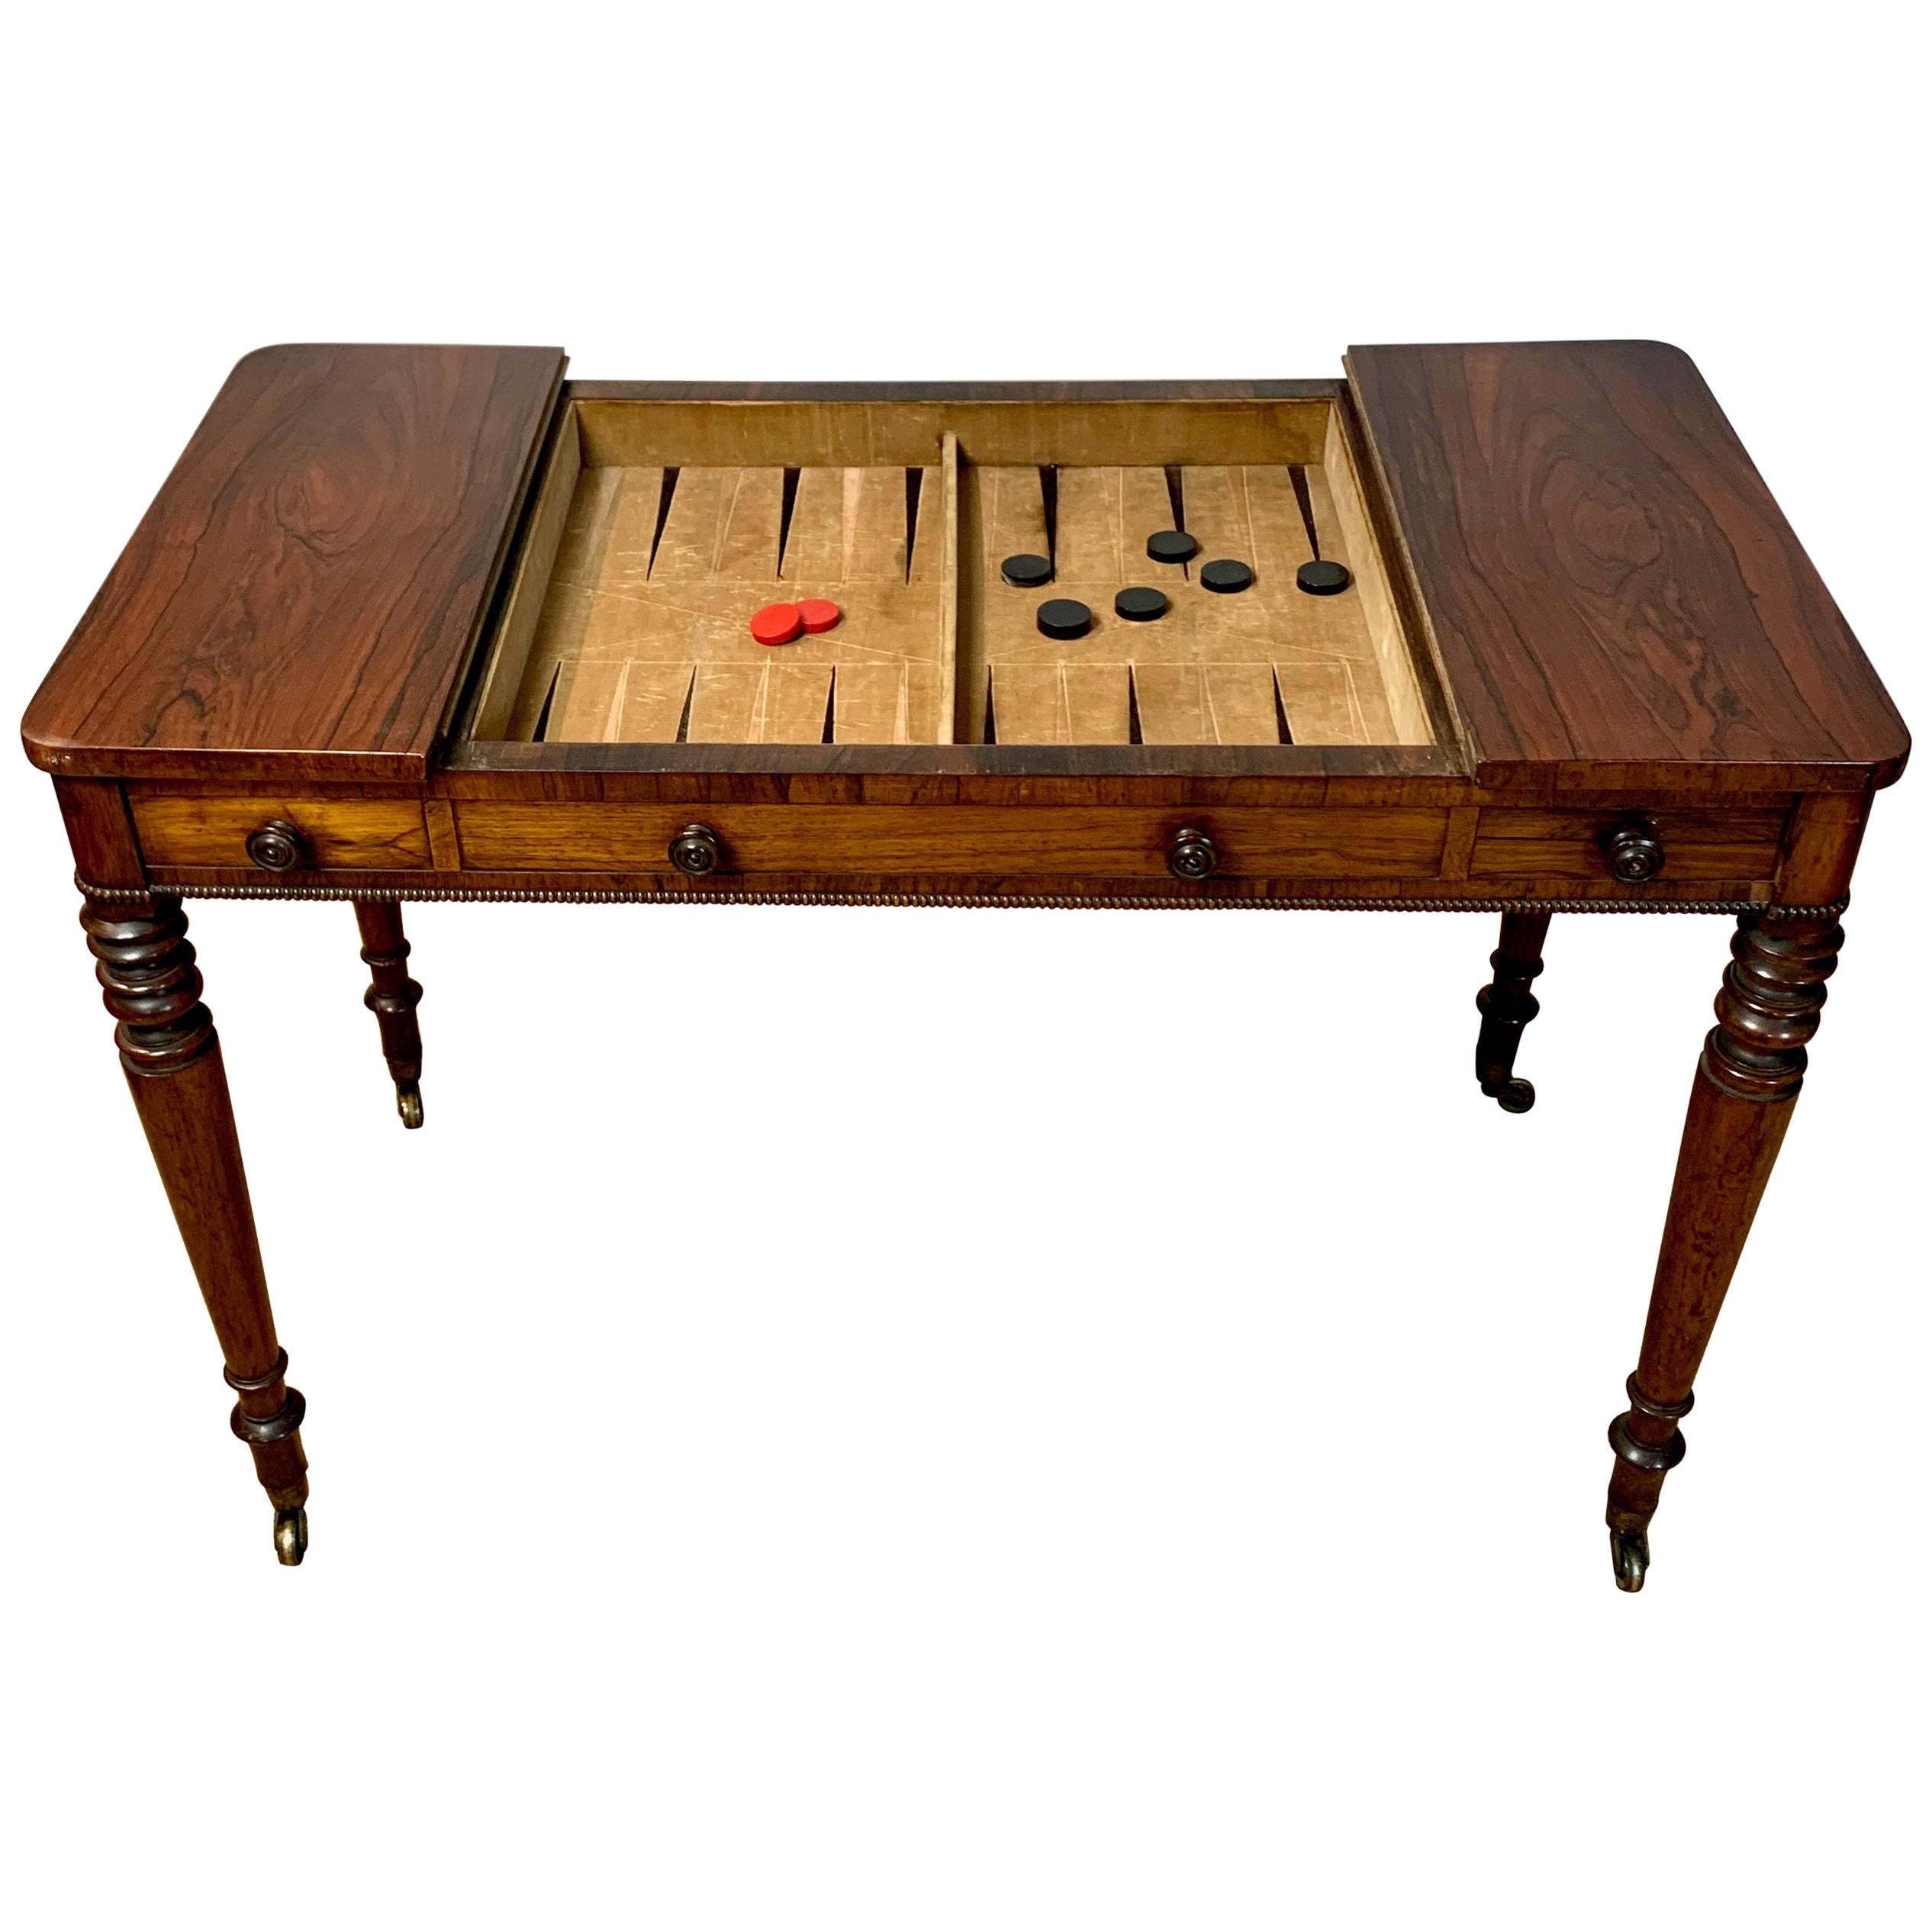 English William IV Games or Tric Trac Table